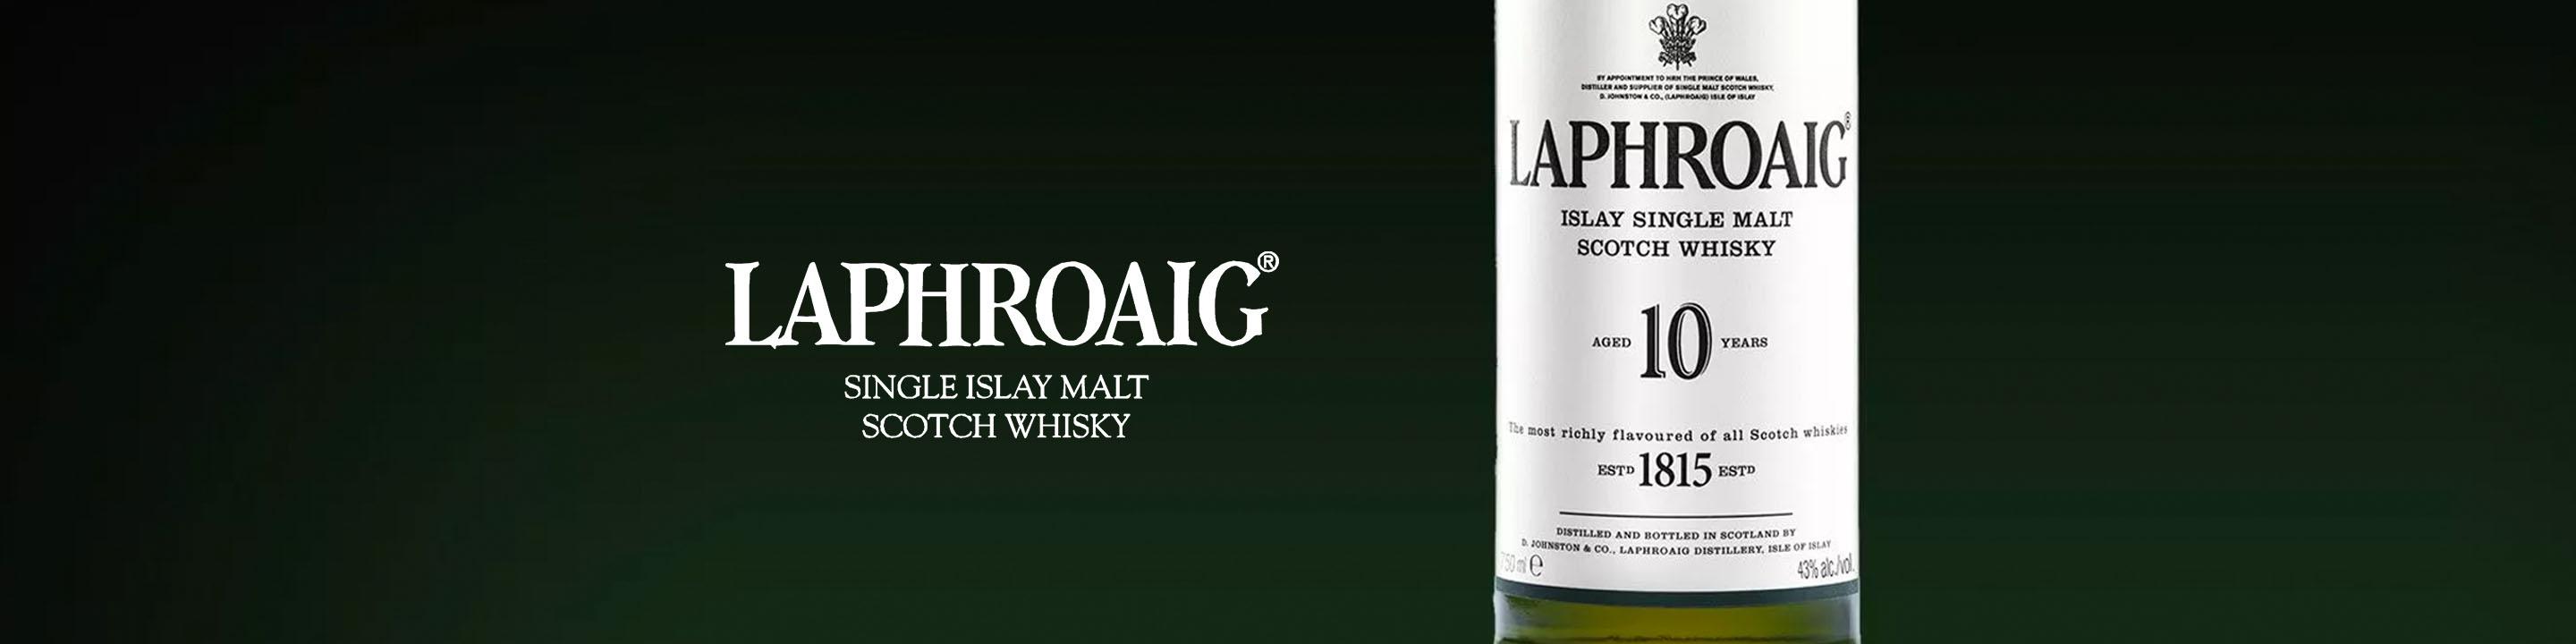 The original Laphroaig, distilled following traditions laid down by Ian Hunter over 75 years ago. In making Laphroaig, malted barley is dried over a peat fire. The smoke from this peat, found only on Islay, gives Laphroaig its particularly rich flavour. 

Buy Laphroaig online now from nearby liquor stores via Minibar Delivery.